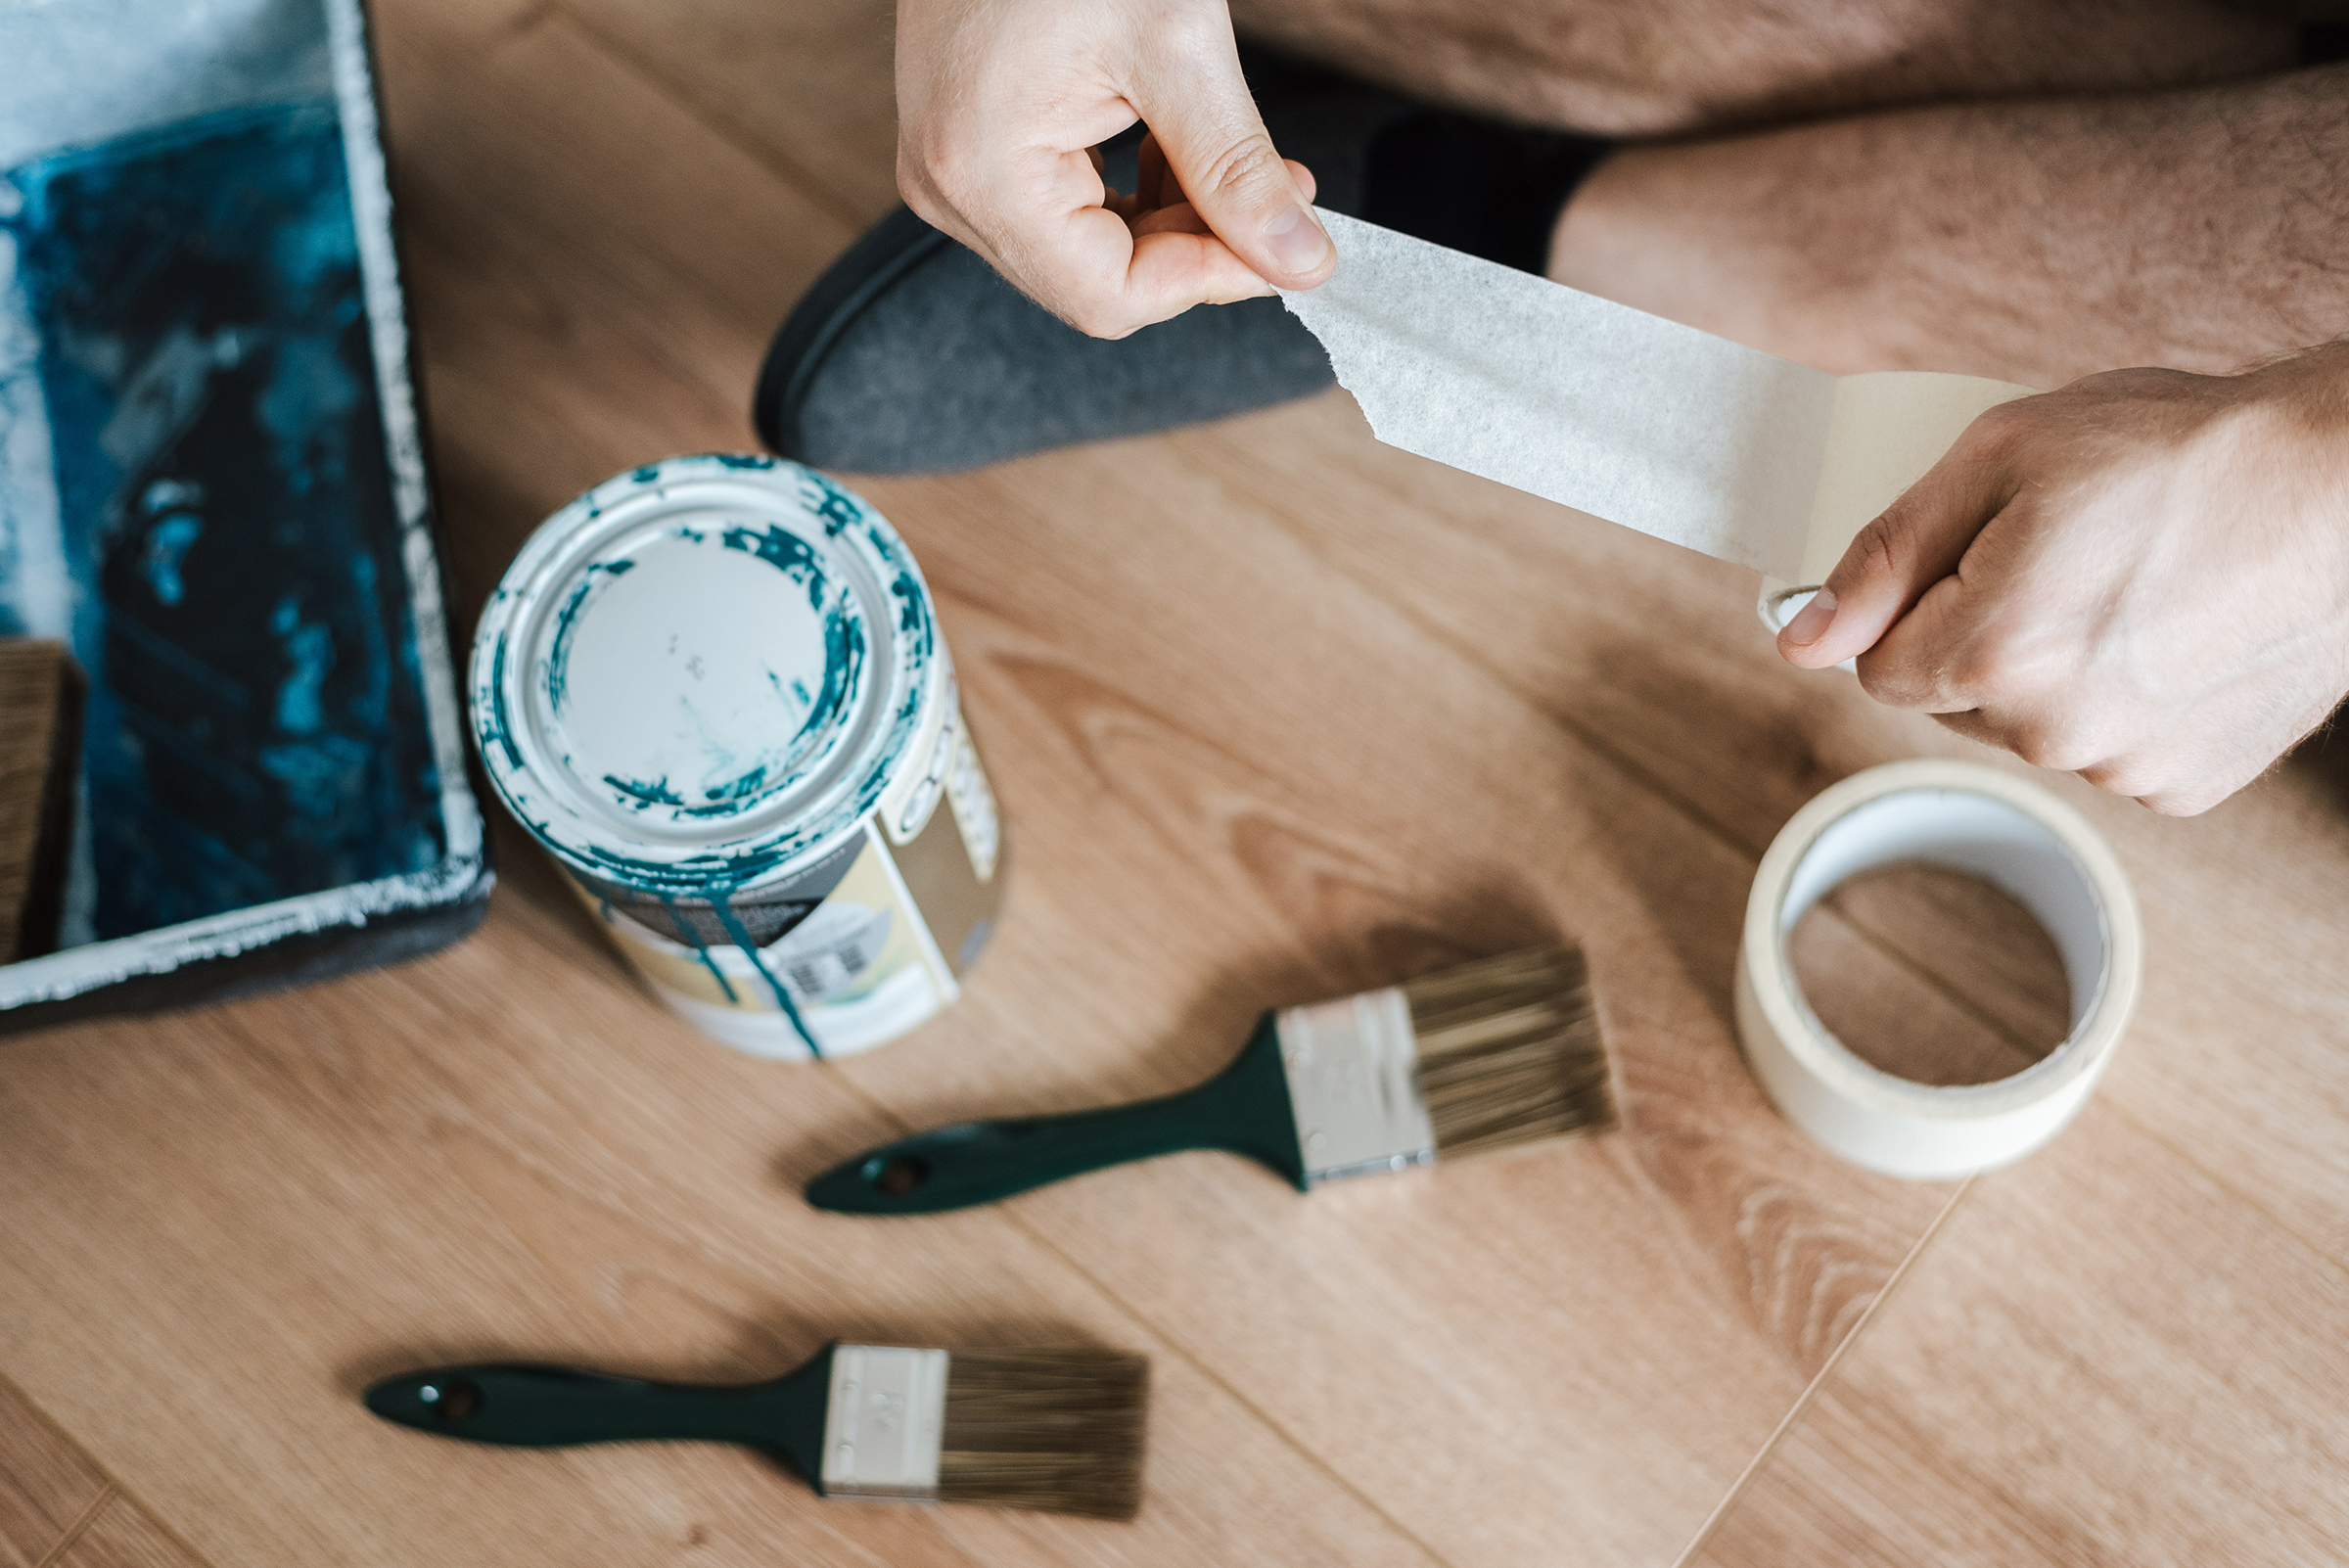 Tips for Cost-Effective but Successful Home Renovation